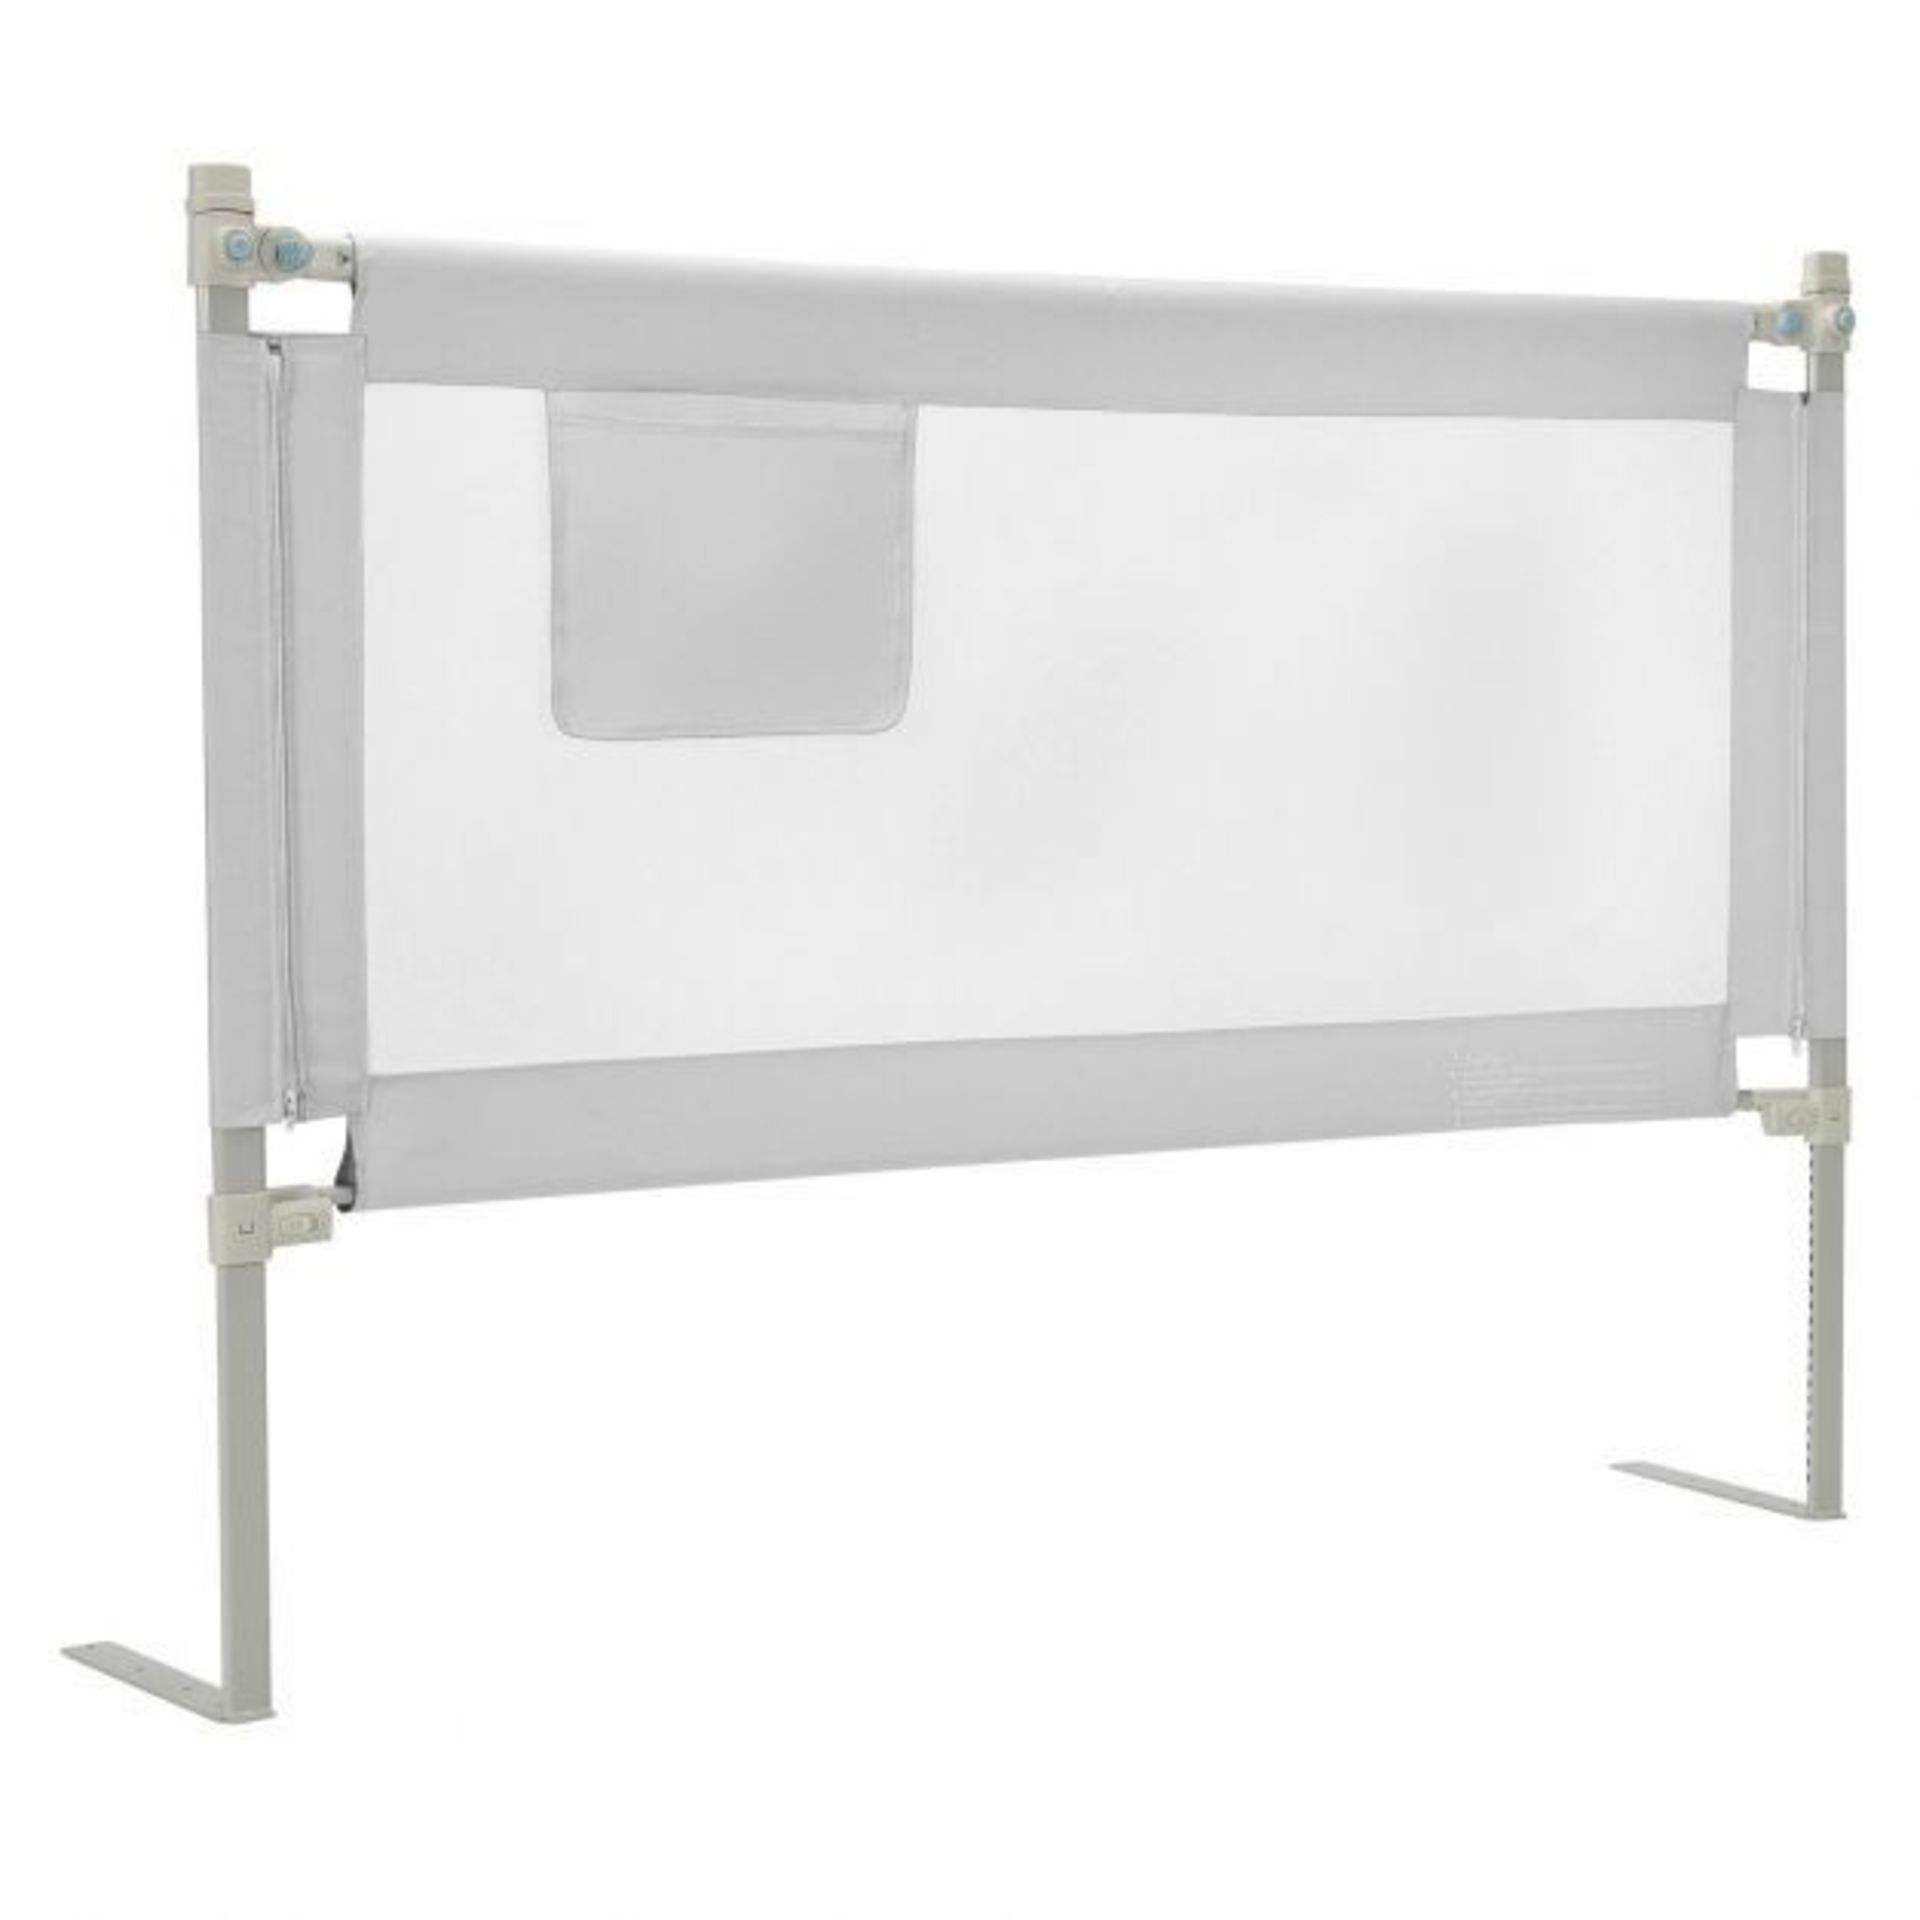 145cm Height Adjustable Bed Rail with Storage Pocket and Safety Lock. - ER53.